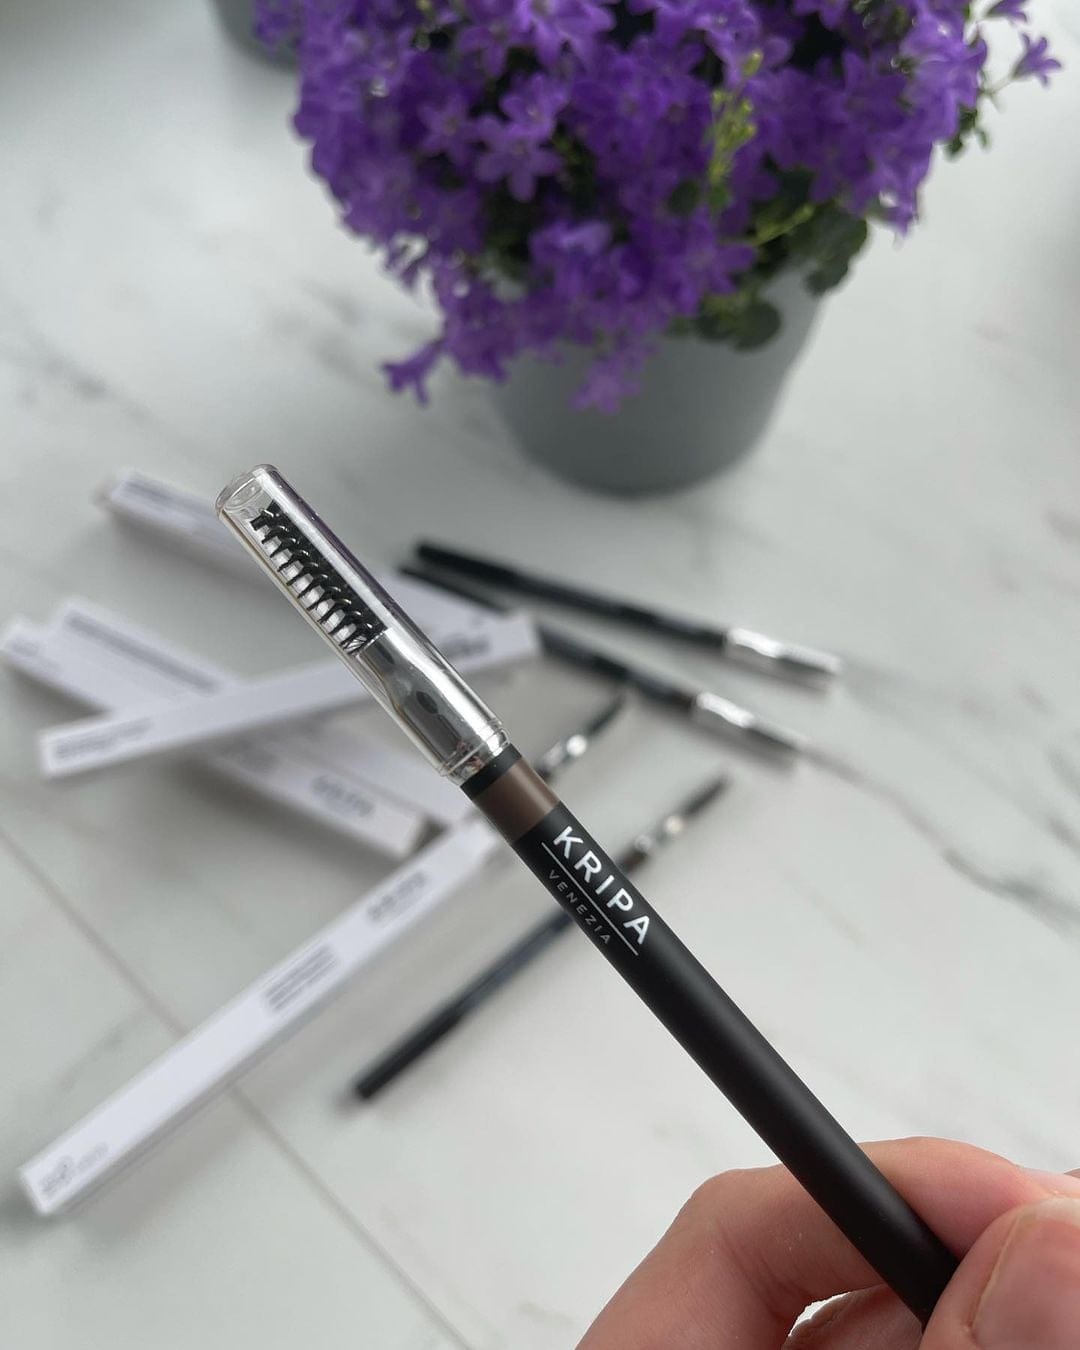 Kripa Cosmetics Australia Brow Pencil Brow Pencil Natural Brow Pencil for Perfectly Defined Brows